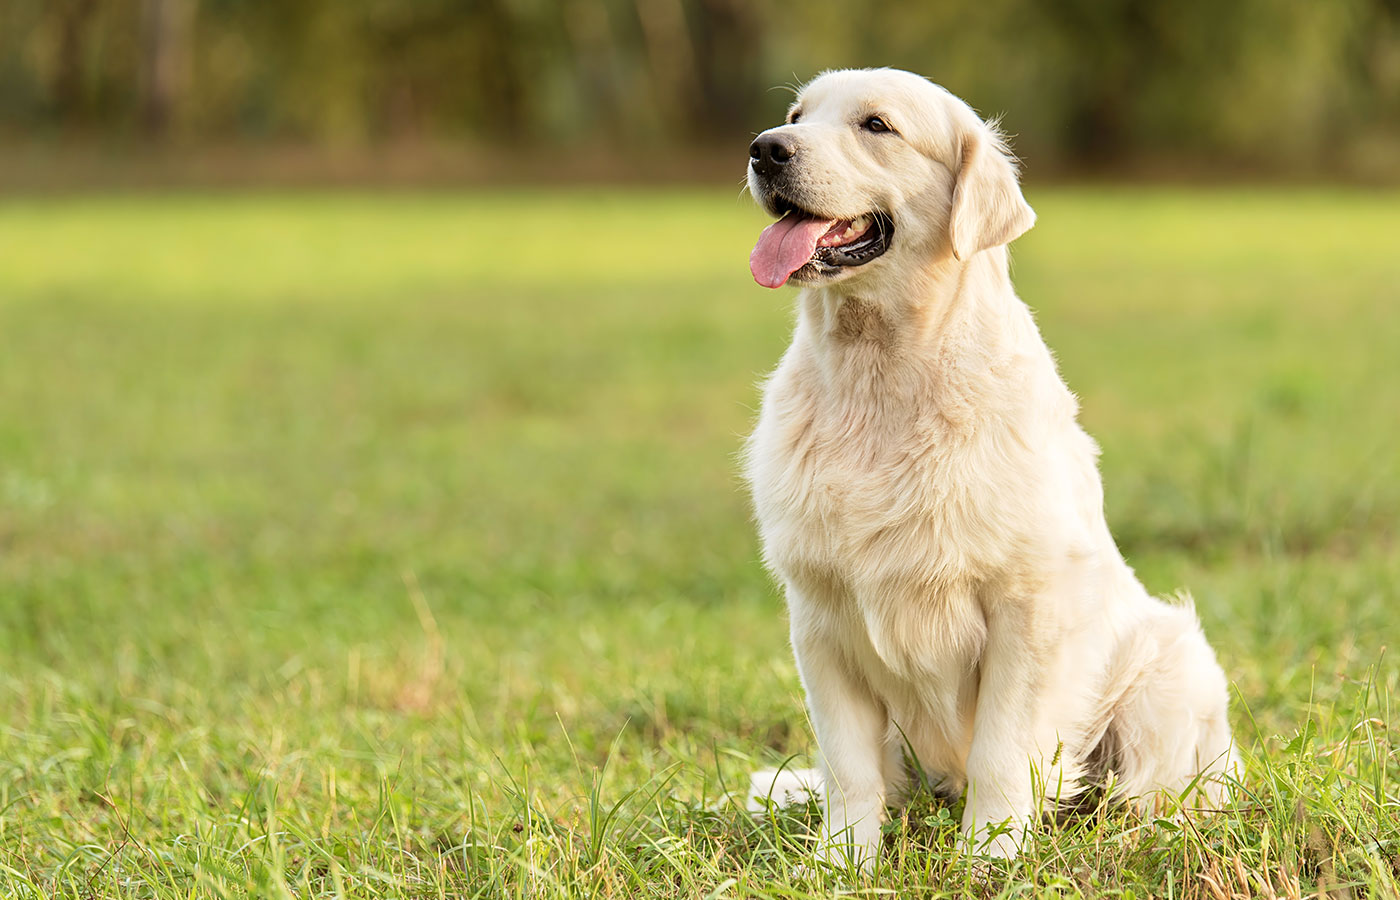 Beauty Golden retriever dog in the park - Image